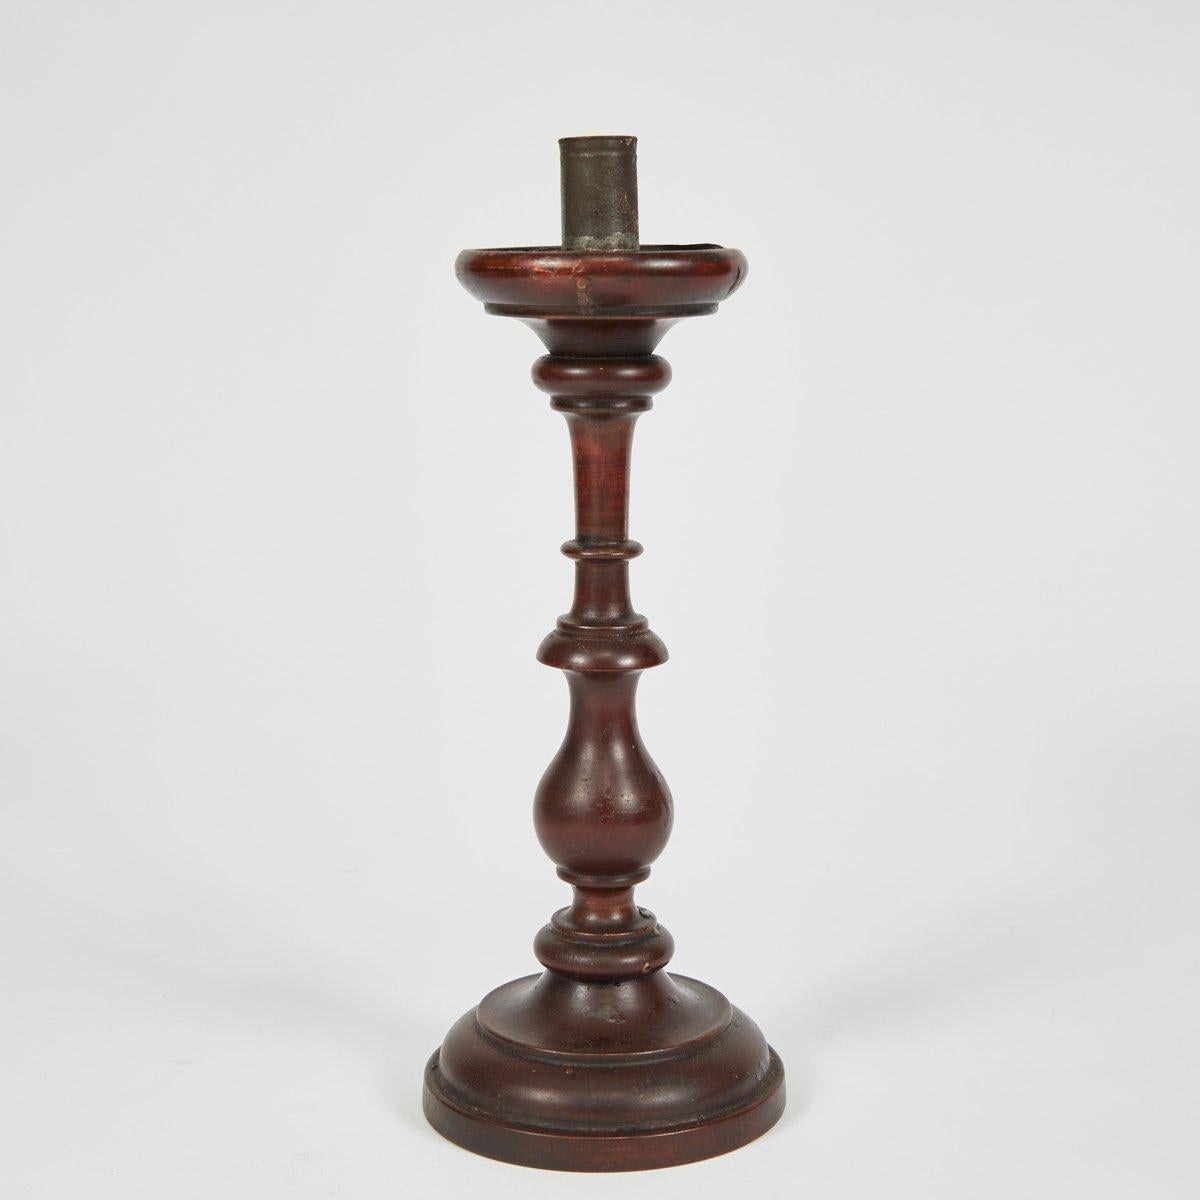 French 19th-century turned wood candlestick in walnut. With a dignified and gracious air, this well-patinated piece brings a warm sophistication to any environment. 

France, circa 1860

Dimensions: 4W x 4D x 11H